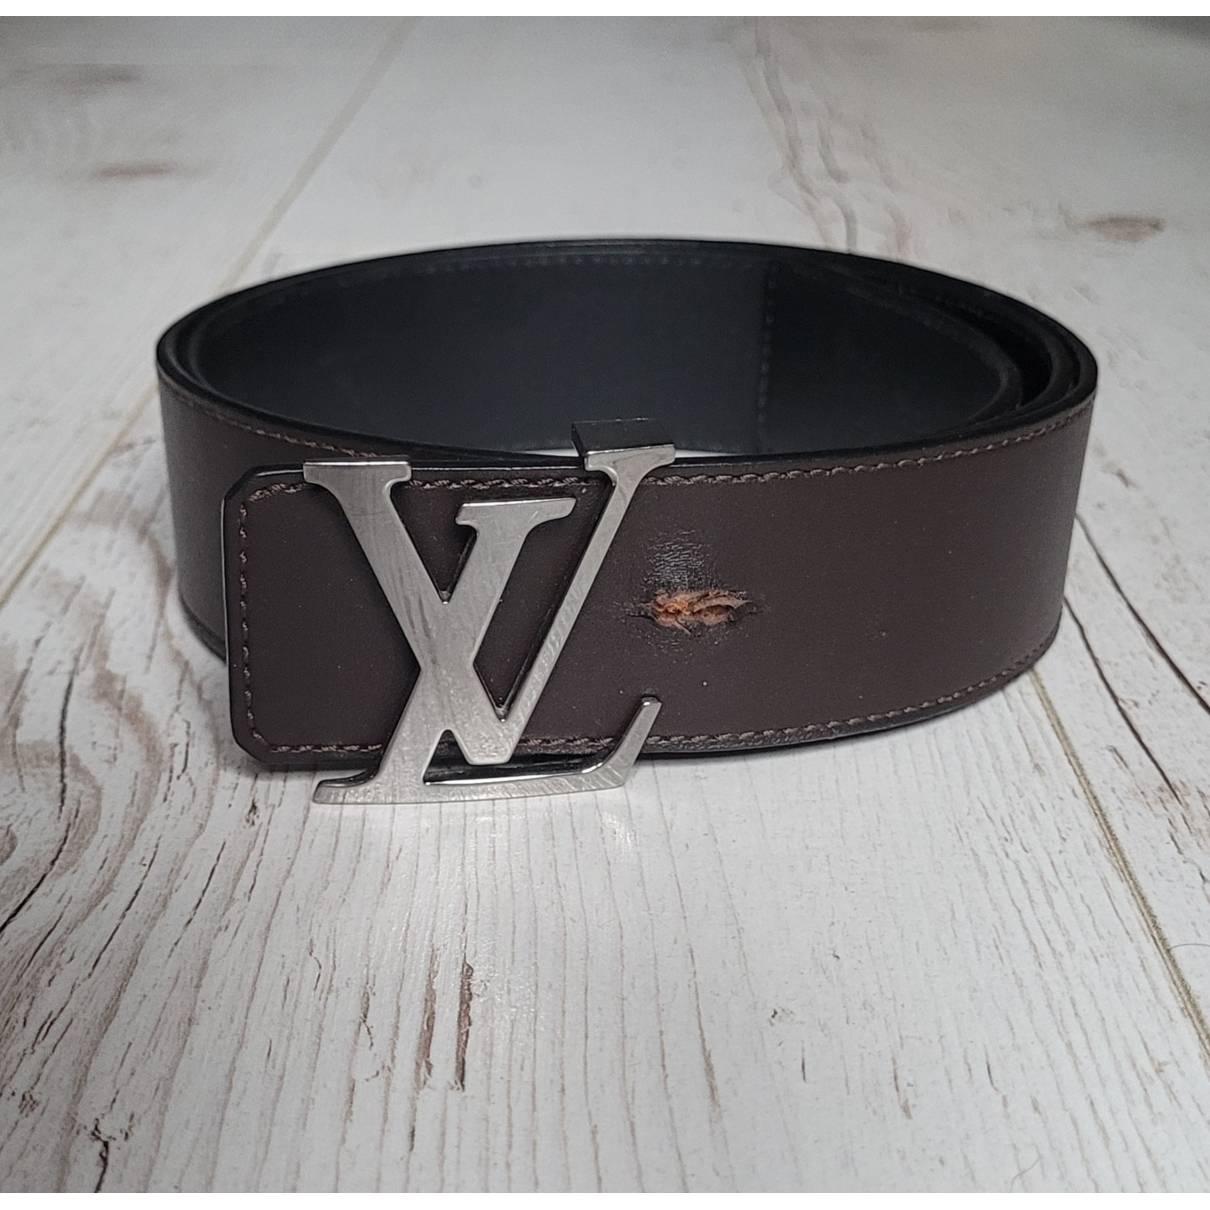 Louis Vuitton - Authenticated Belt - Leather Black for Men, Very Good Condition